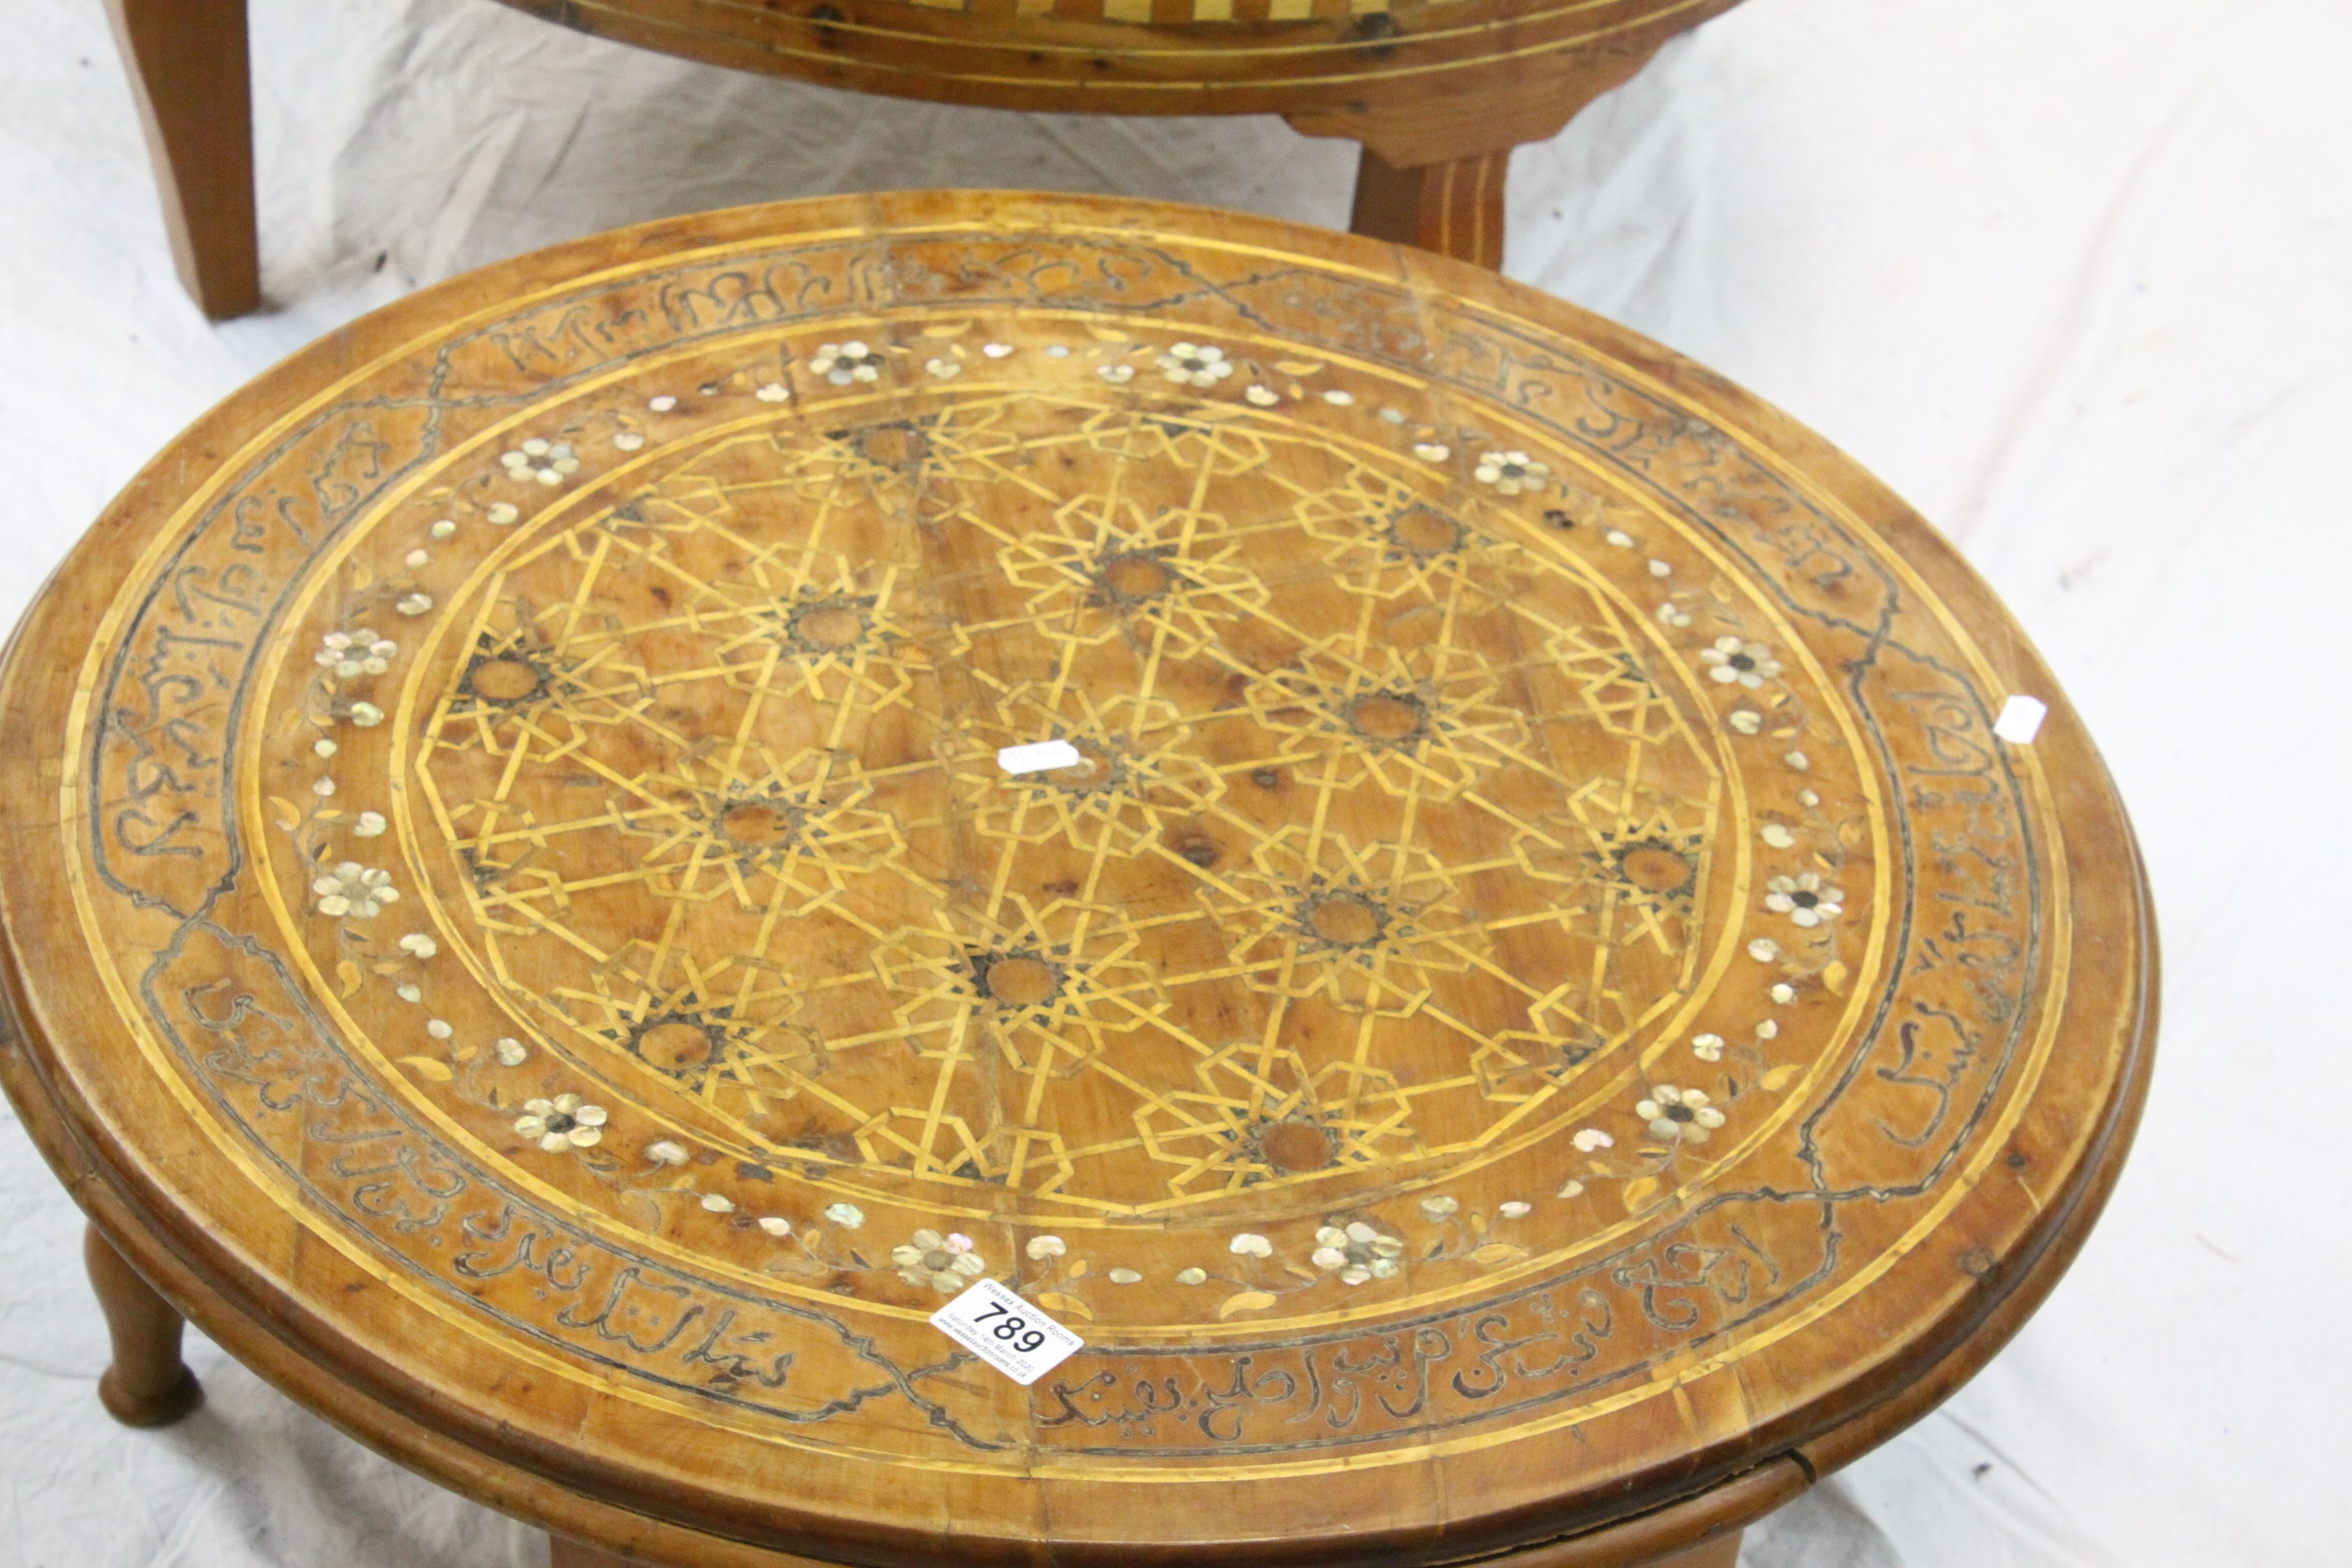 Two Middle Eastern Mother of Pearl Inlaid Circular Coffee Tables, 71cms diameter and 82cms diameter - Image 2 of 4